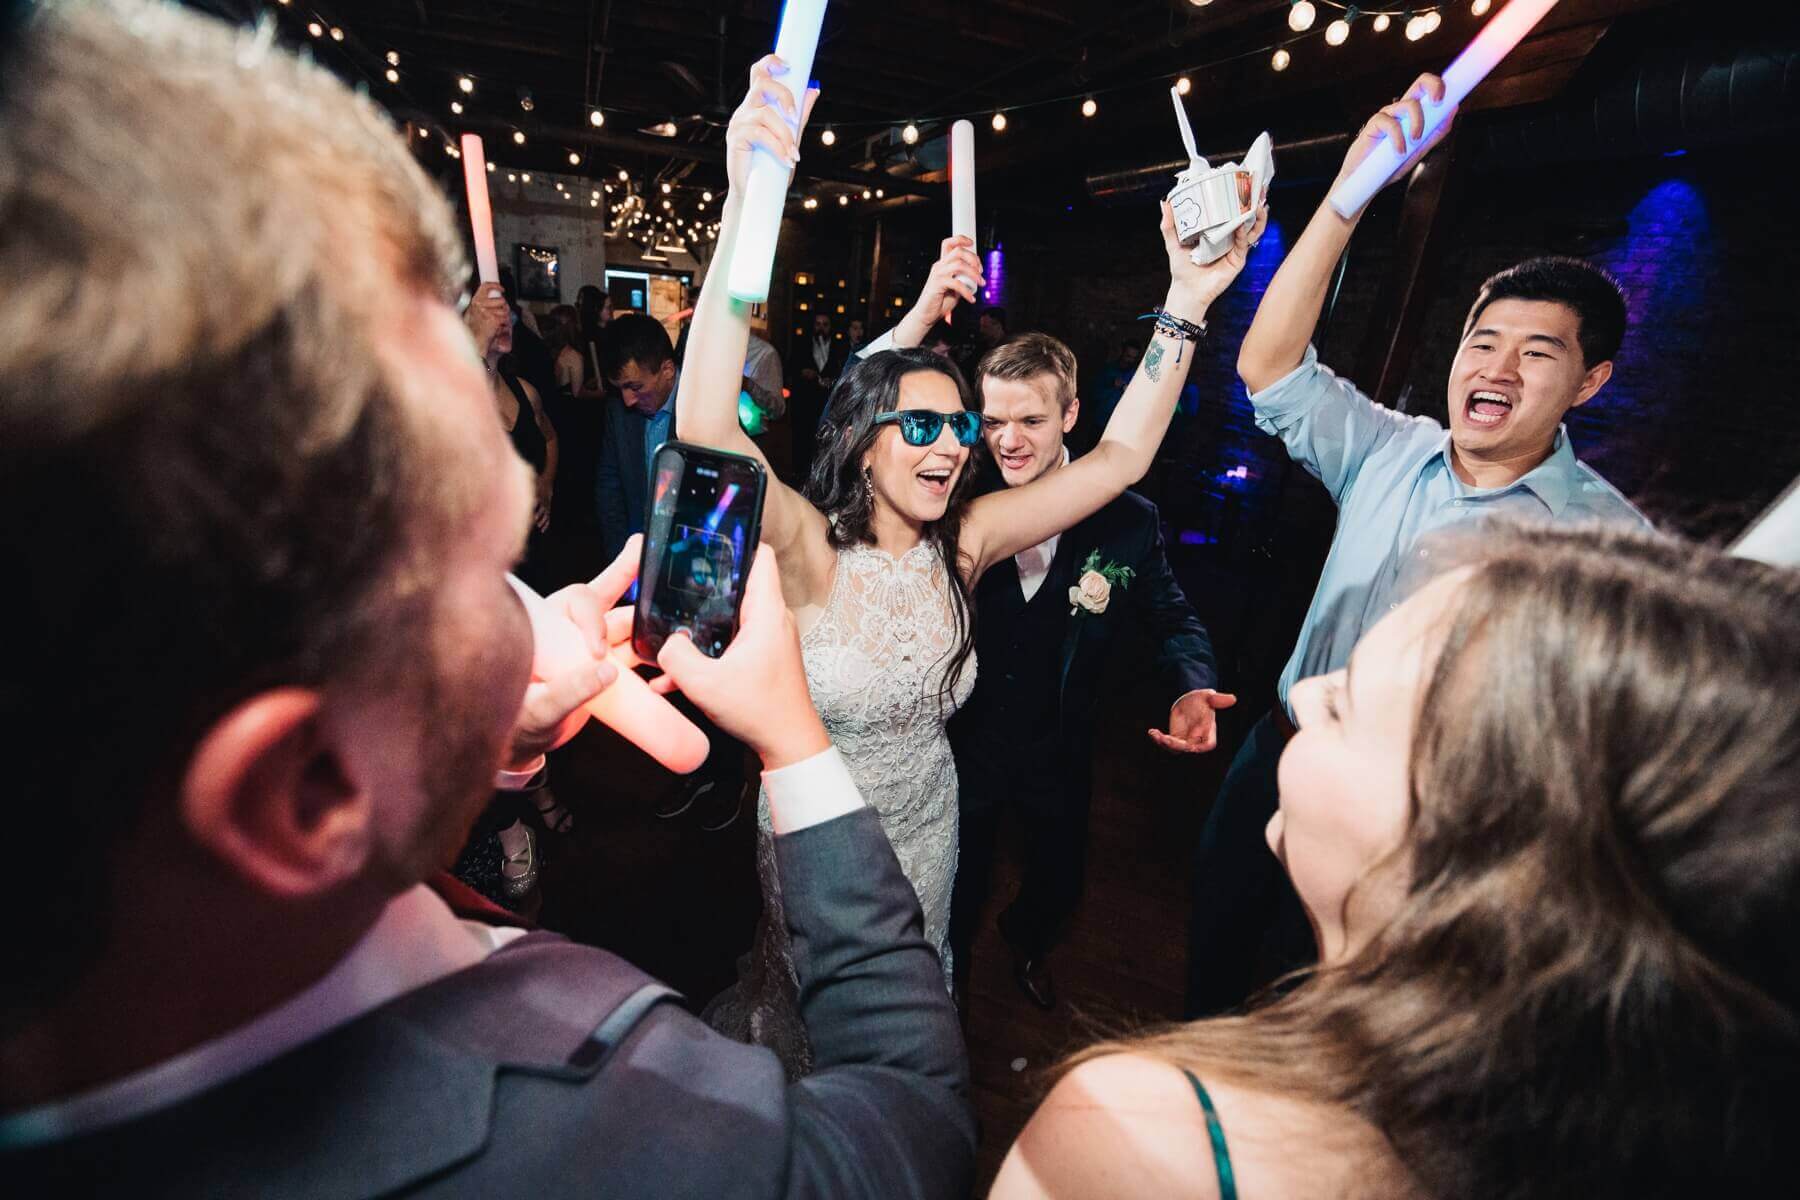 Bride dancing with sunglasses and foam glow sticks